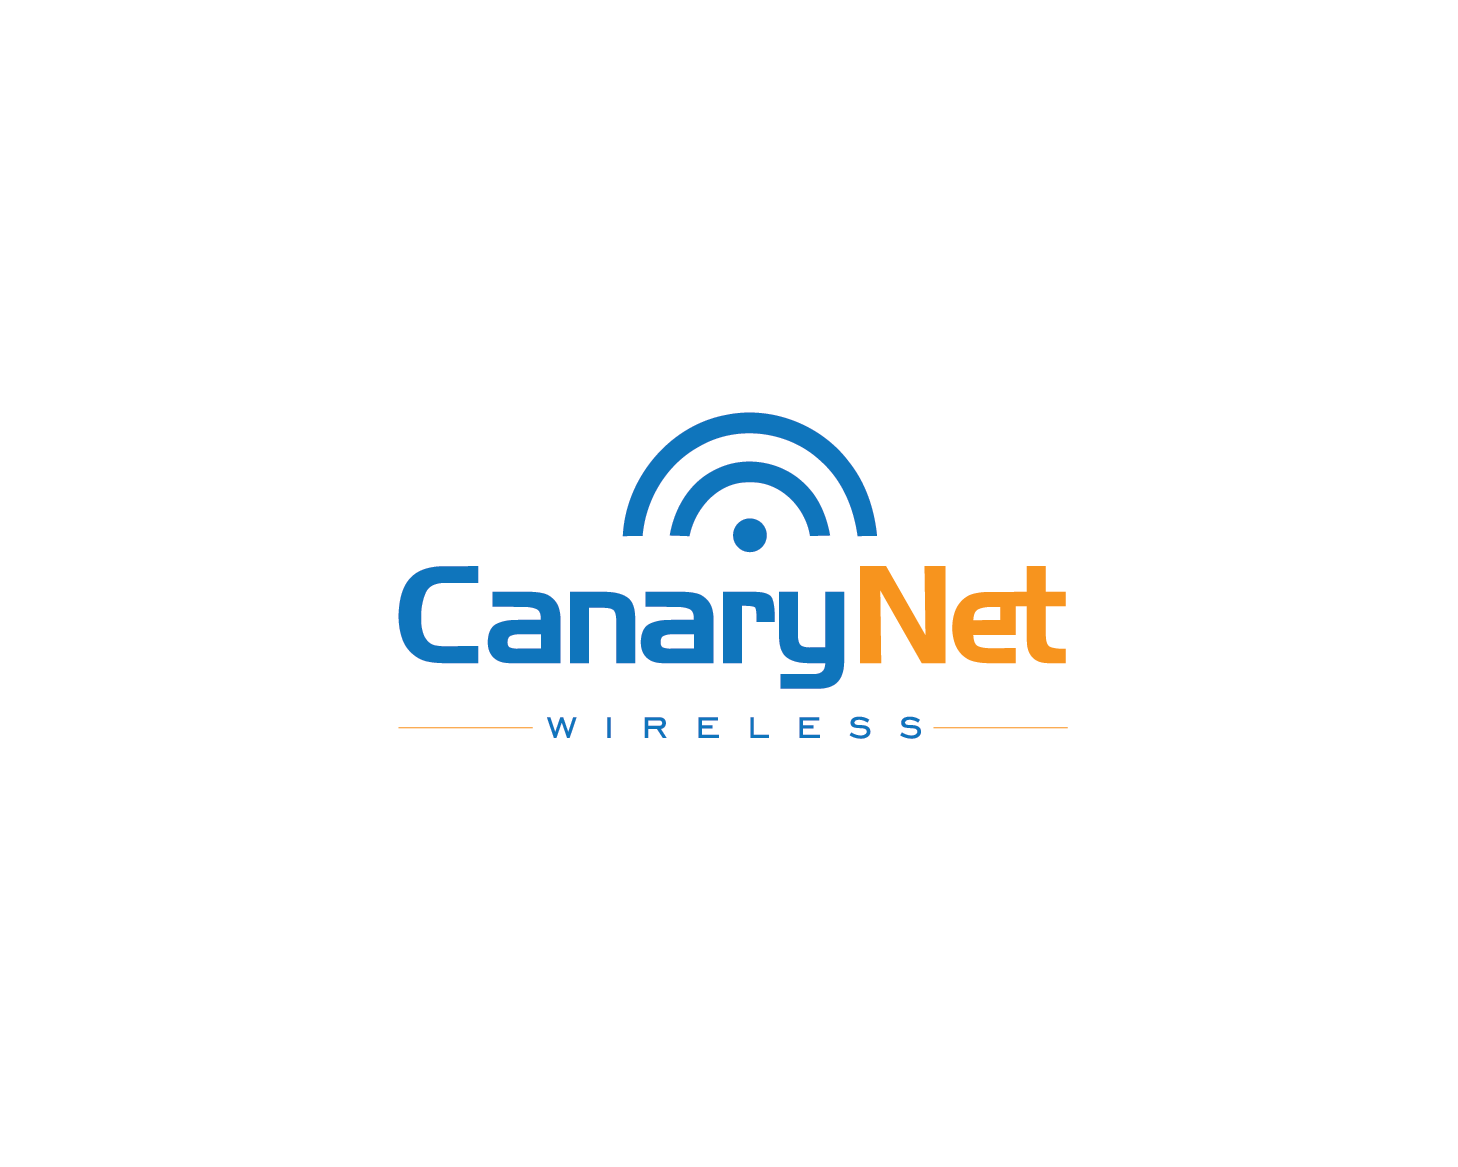 Internet Company Logo - Make an amazing internet services logo design in 24 hours by ...